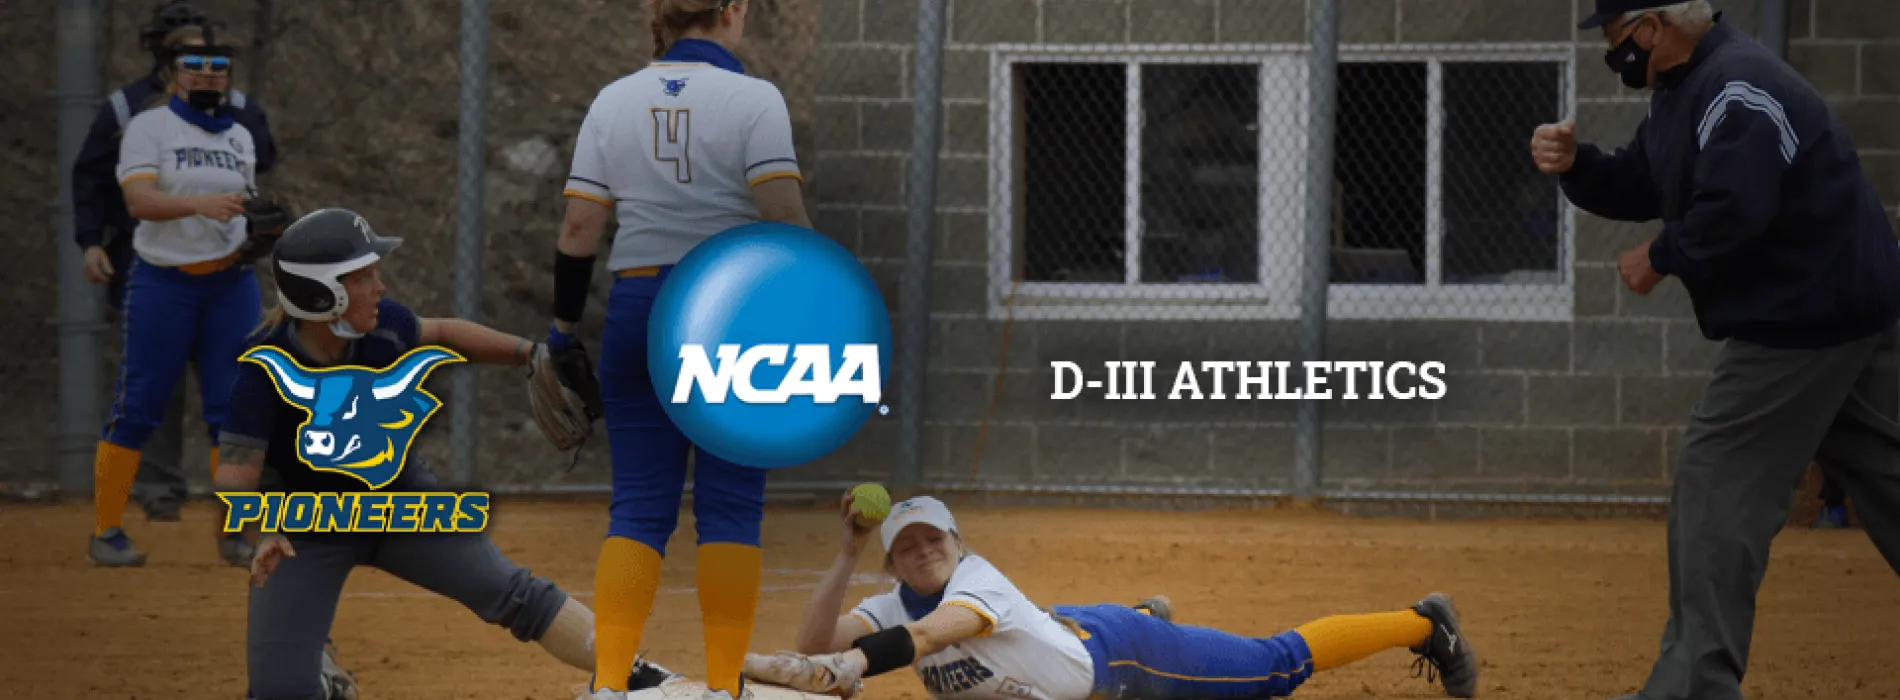 Alfred State Pioneers NCAA D-III athletics. Image of softball game